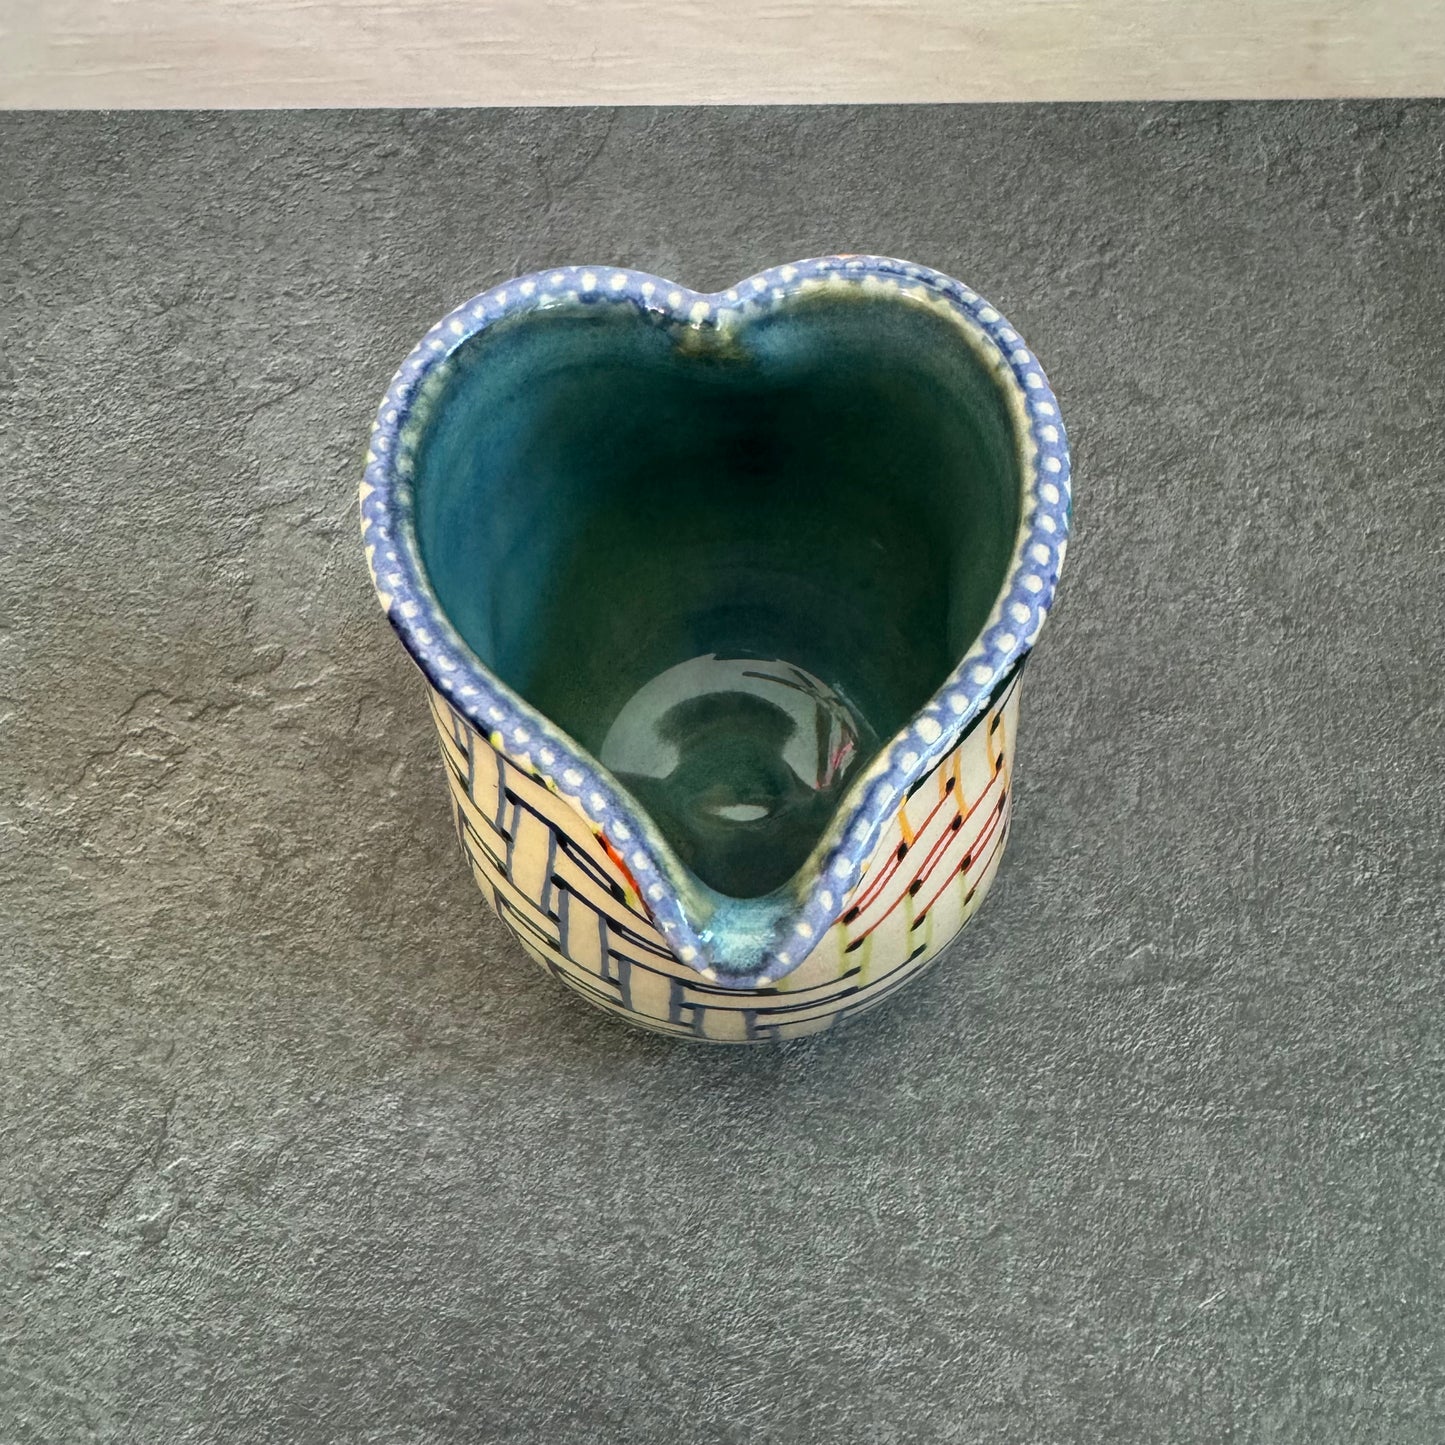 Heart Cup with Woven Rainbow Ribbons